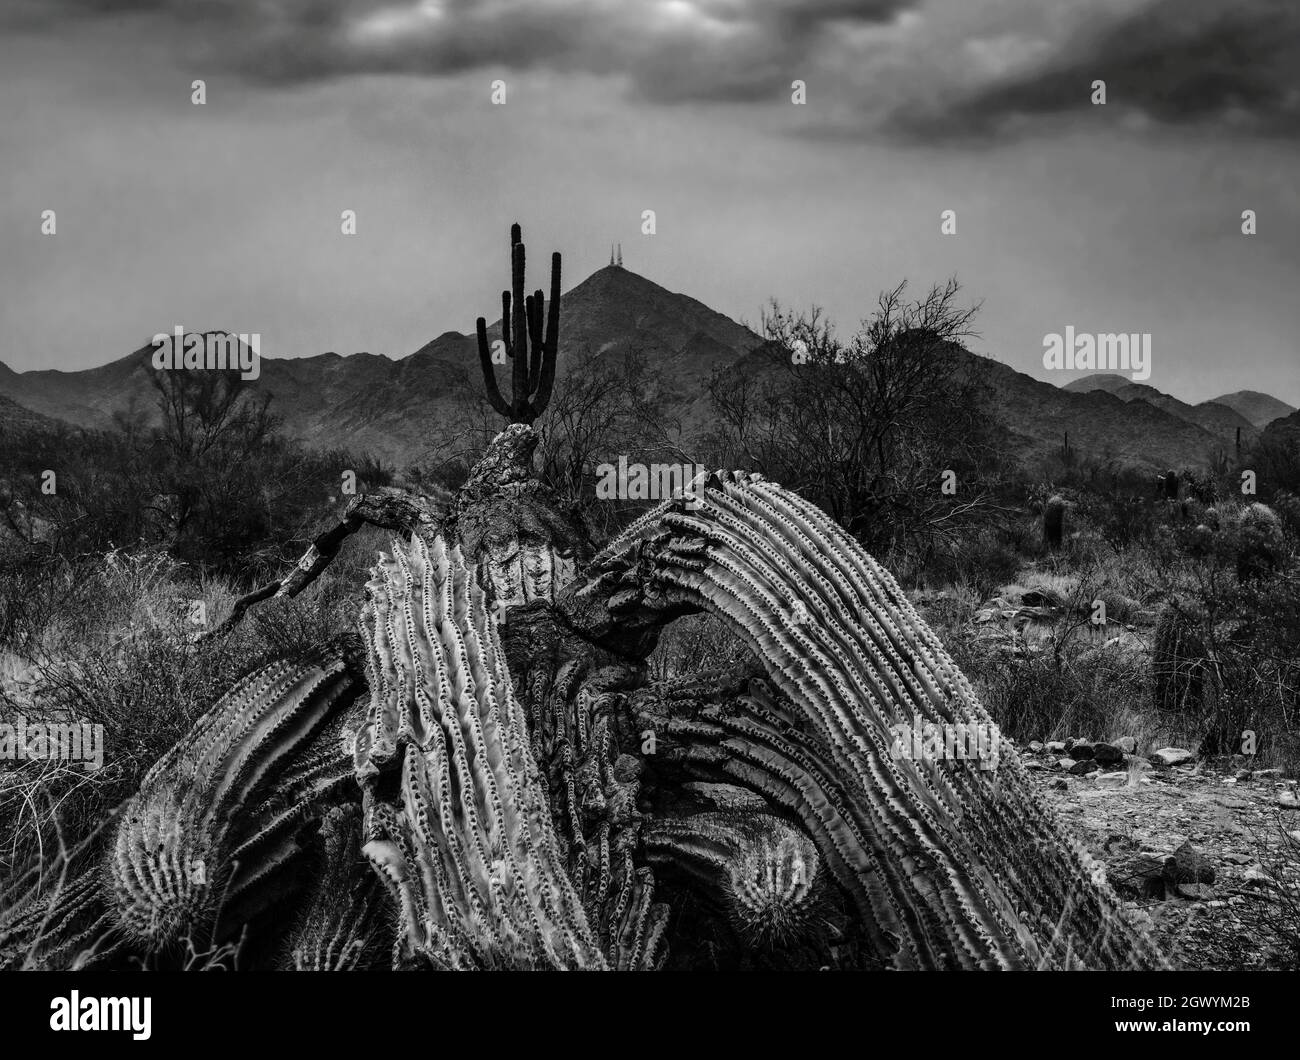 Scenic View Of Desert With Fallen Saguaro Cactus Against Sky And Mountains. Stock Photo